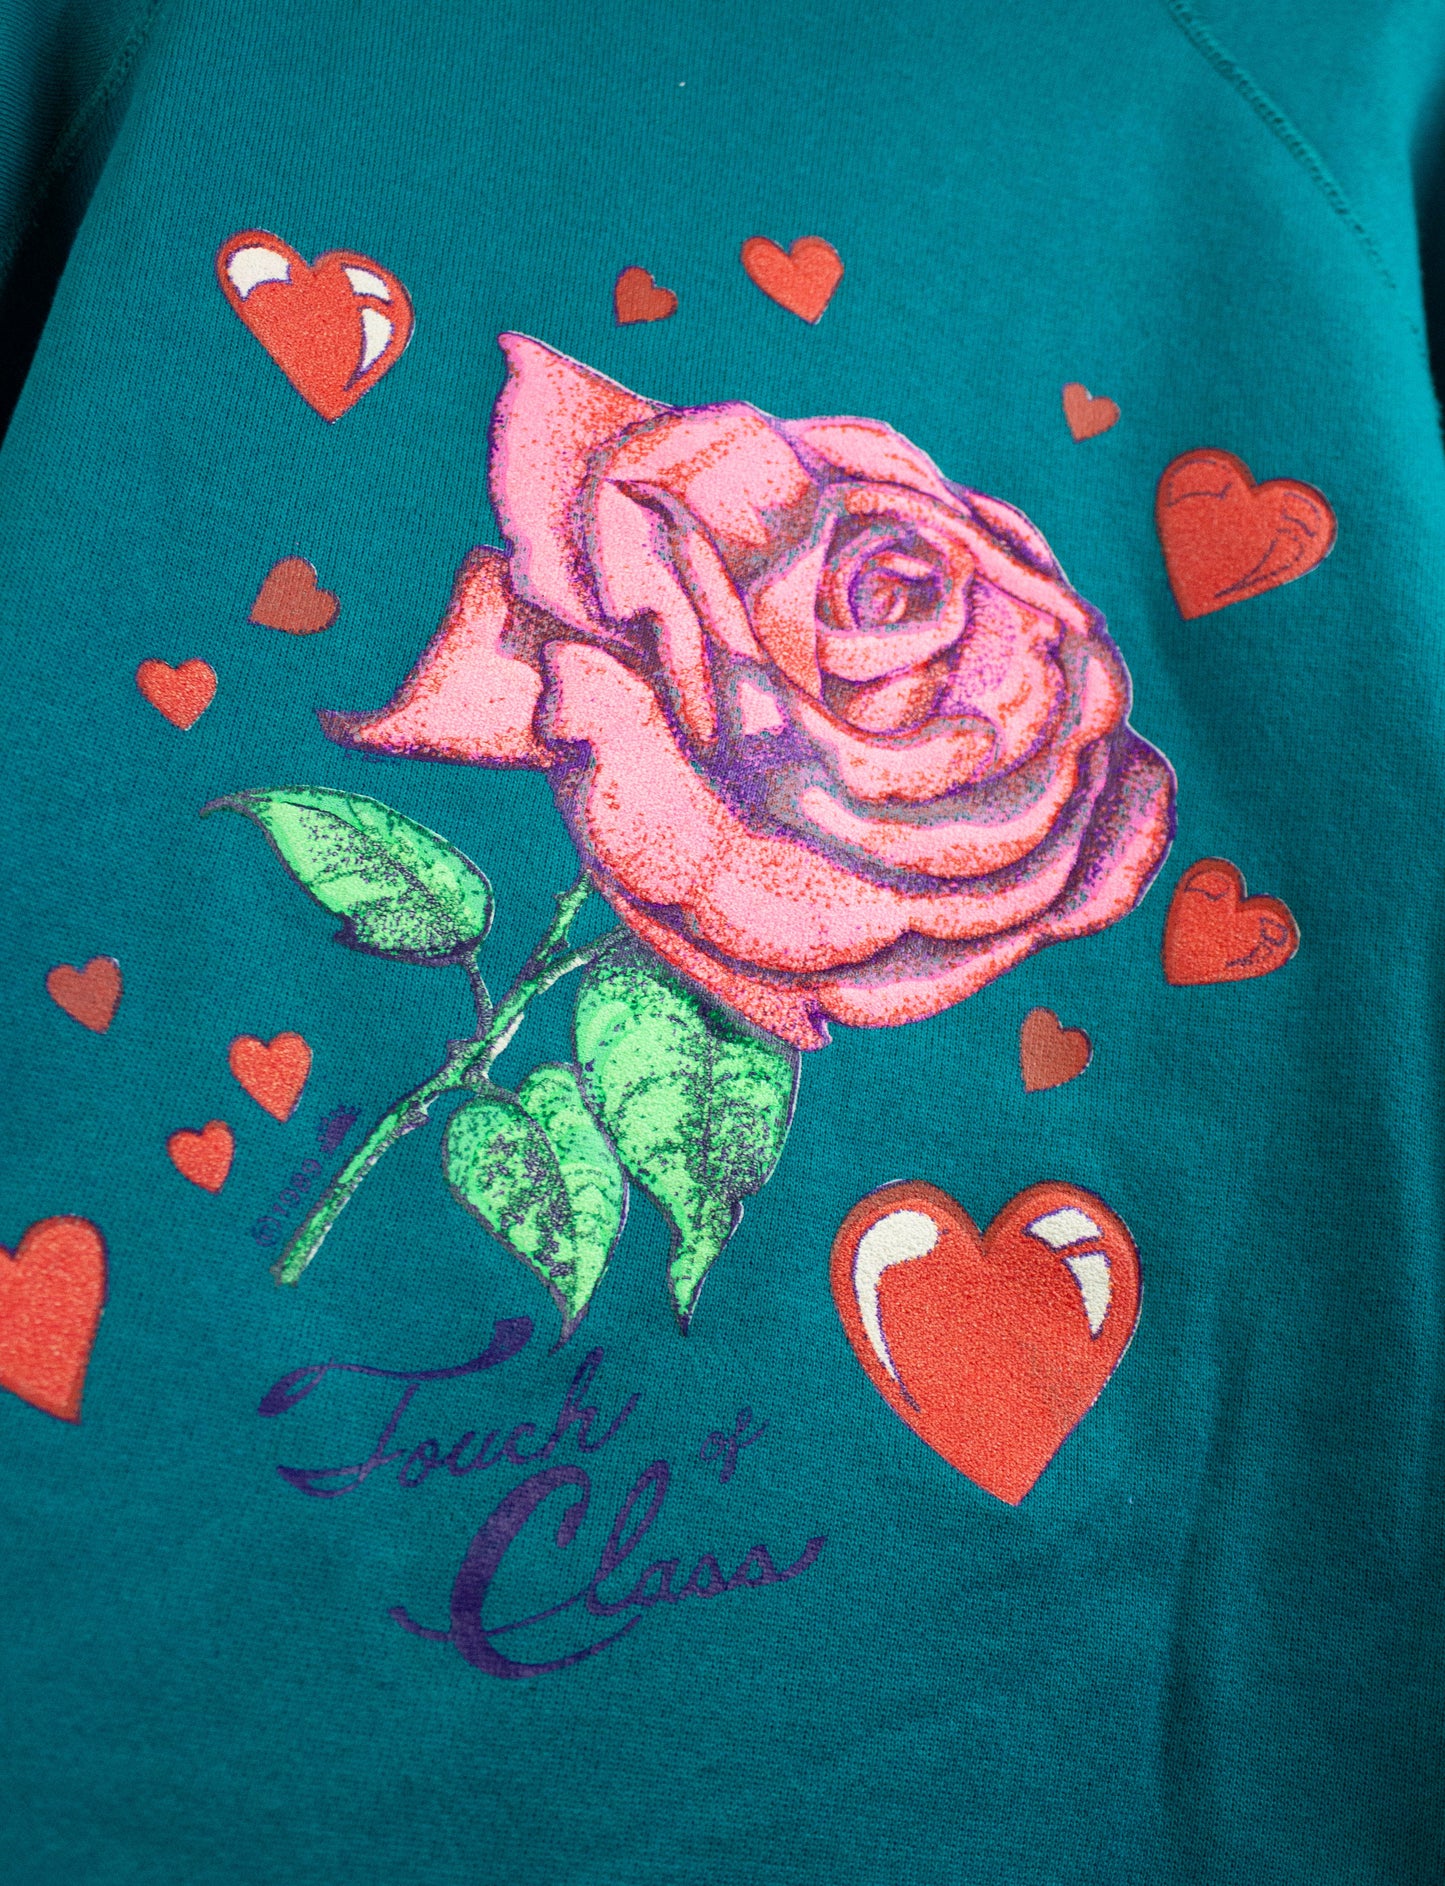 Vintage 1989 "Touch of Class" Rose Cropped Sweatshirt Teal XL